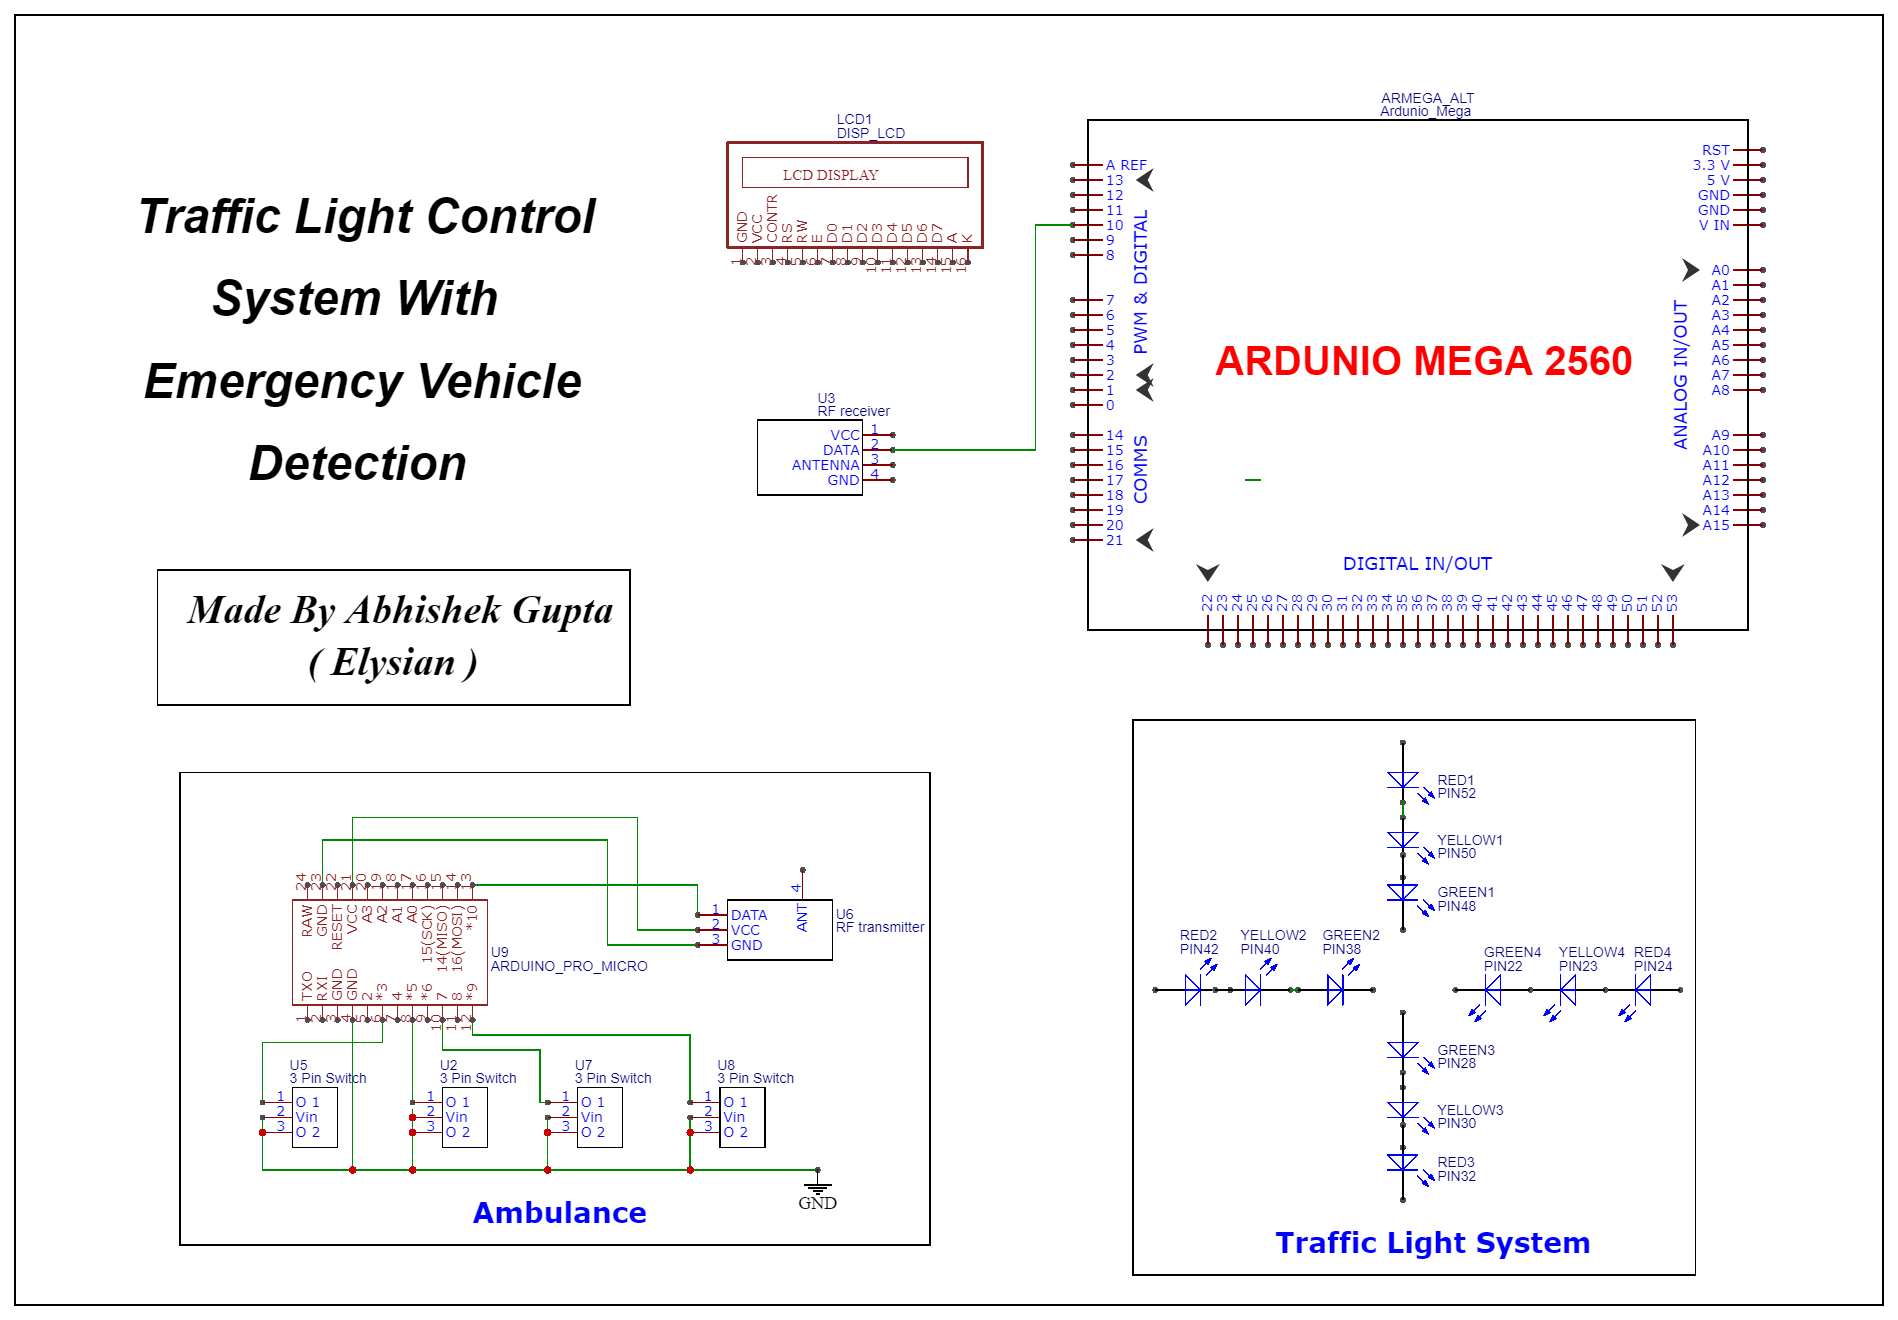 Schematic Traffic Light Control System.png